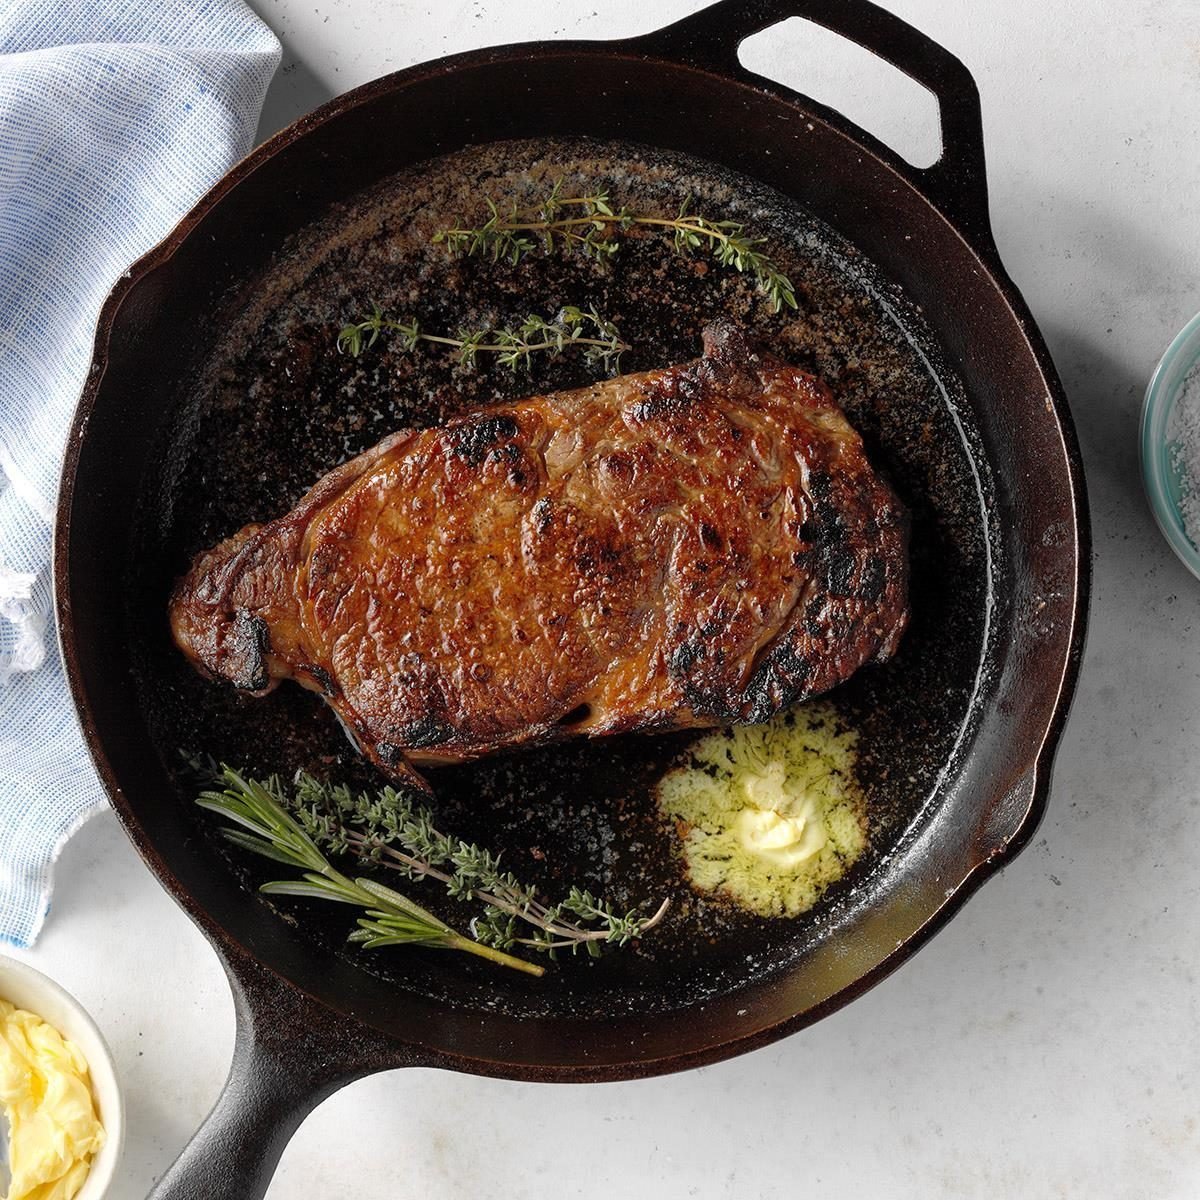 10 Secret Ingredients That Take Your Steak from Good to Great